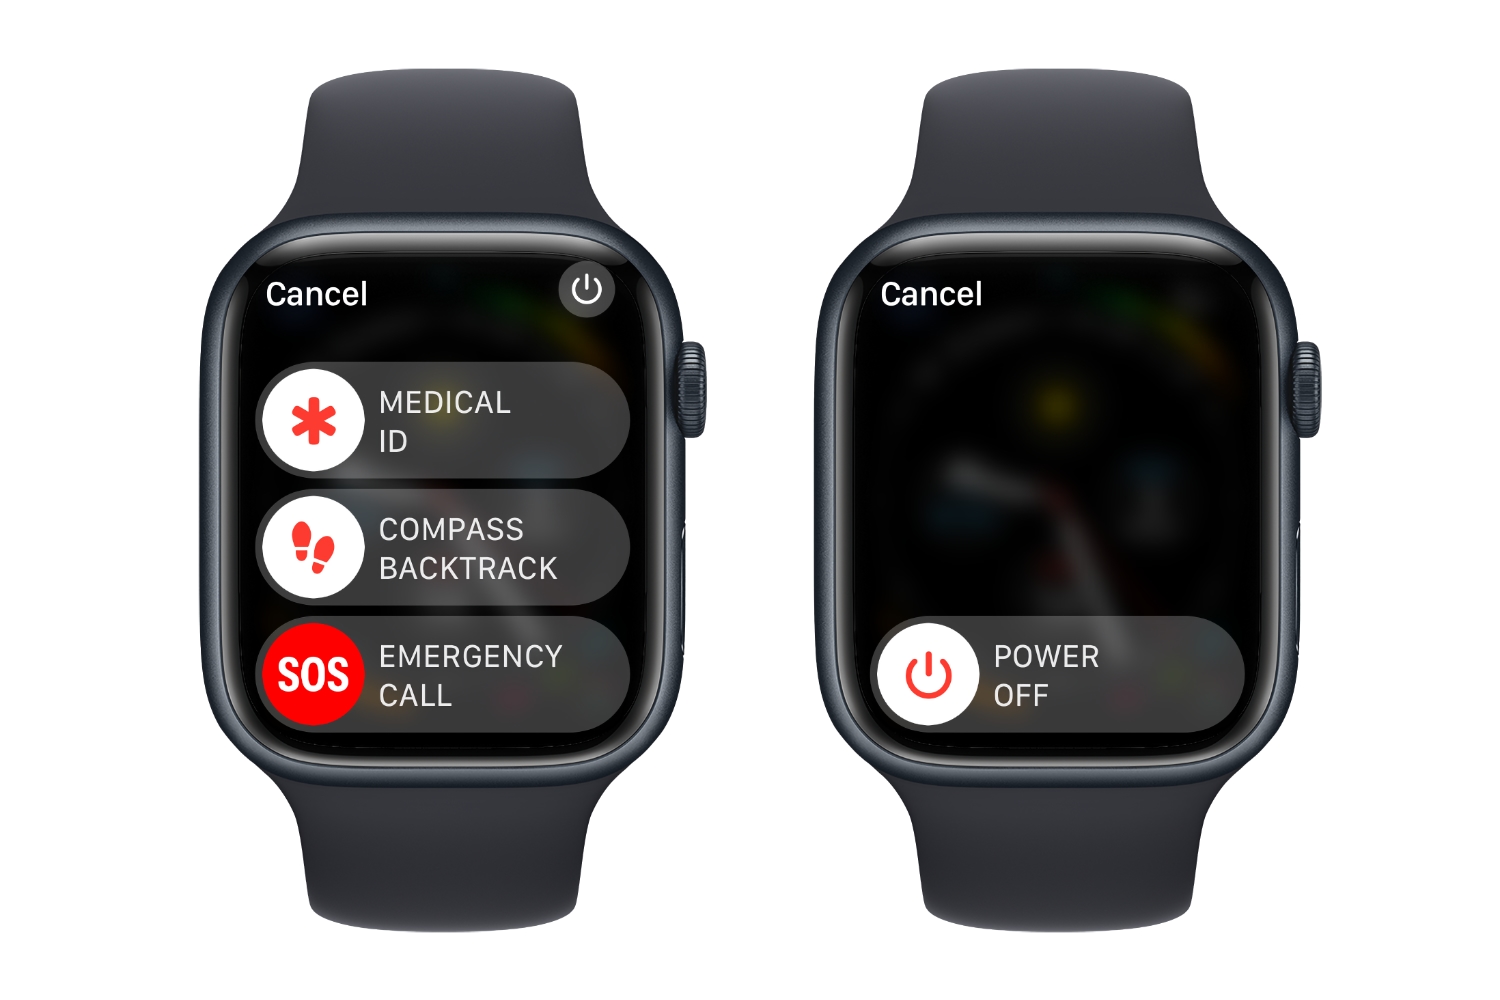 The Apple Watch problems (and how fix them) | Digital Trends